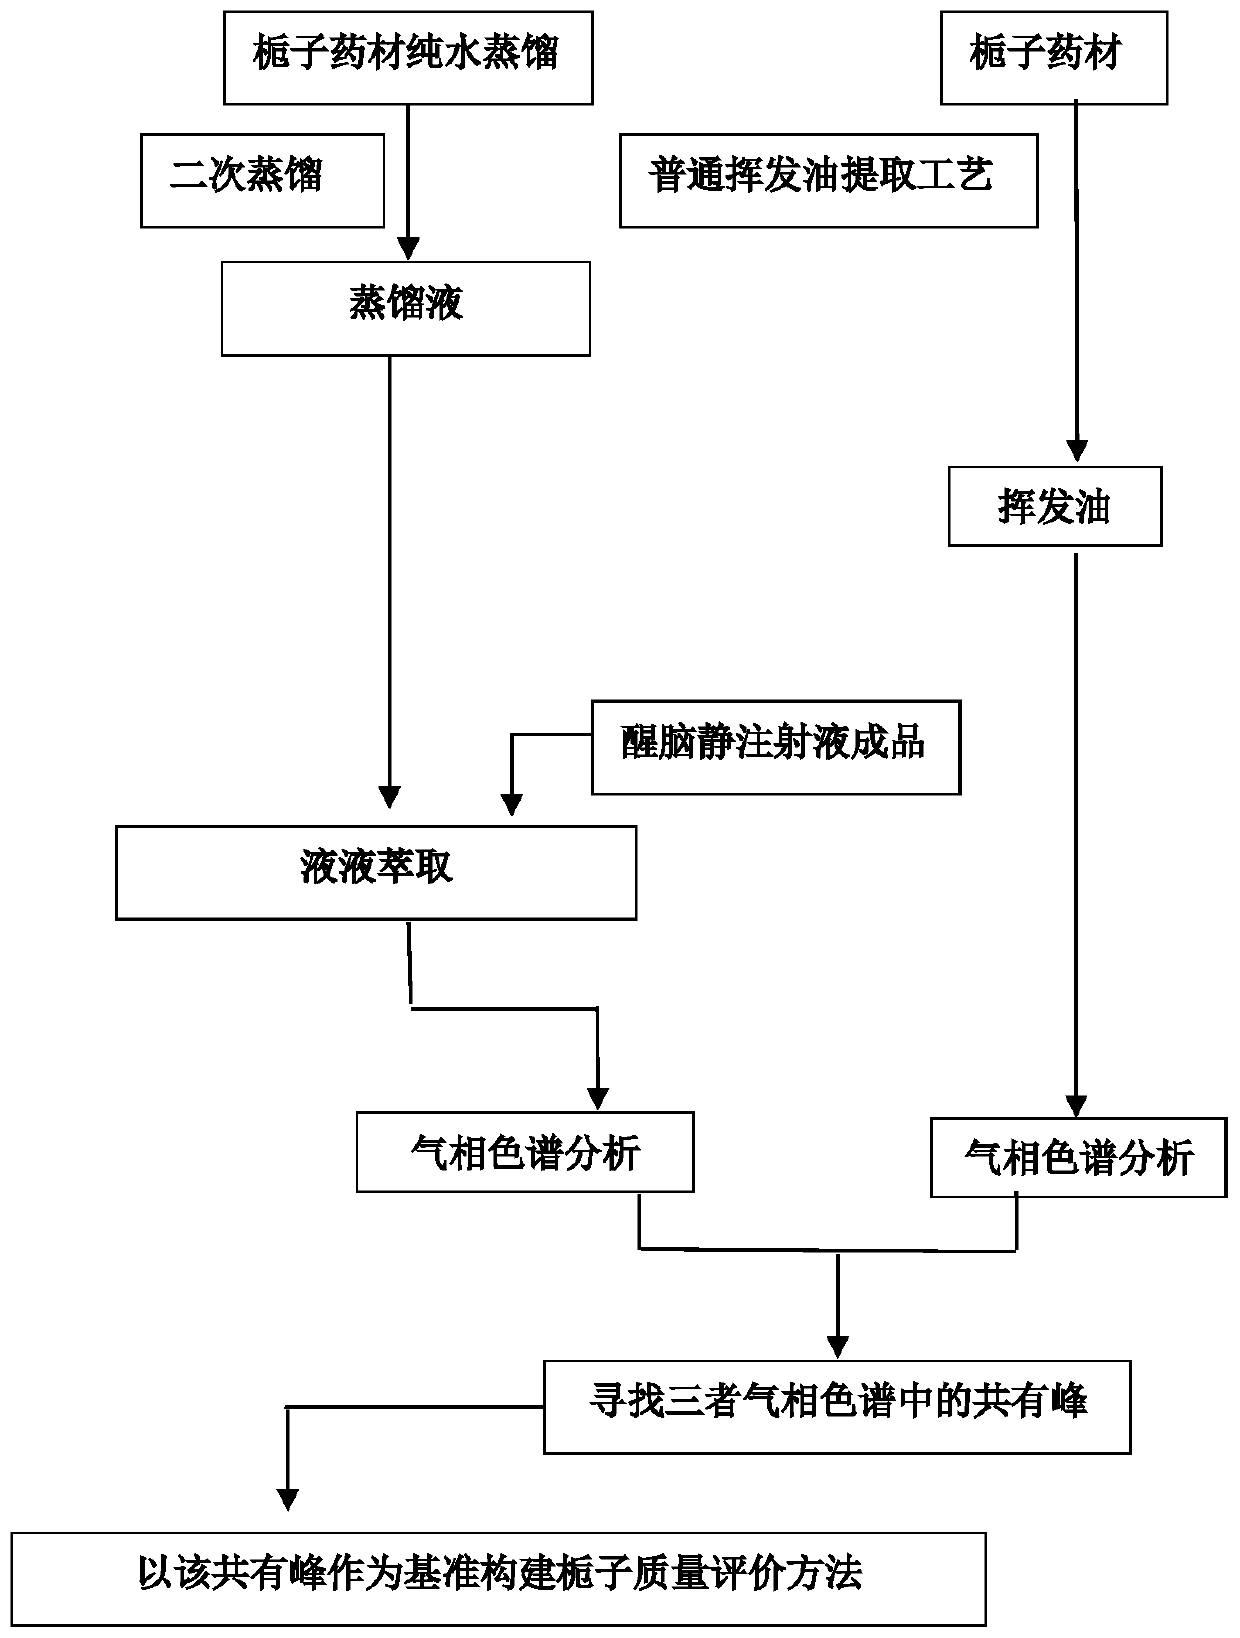 A method for evaluating the quality of Gardenia for Xingnaojing Injection